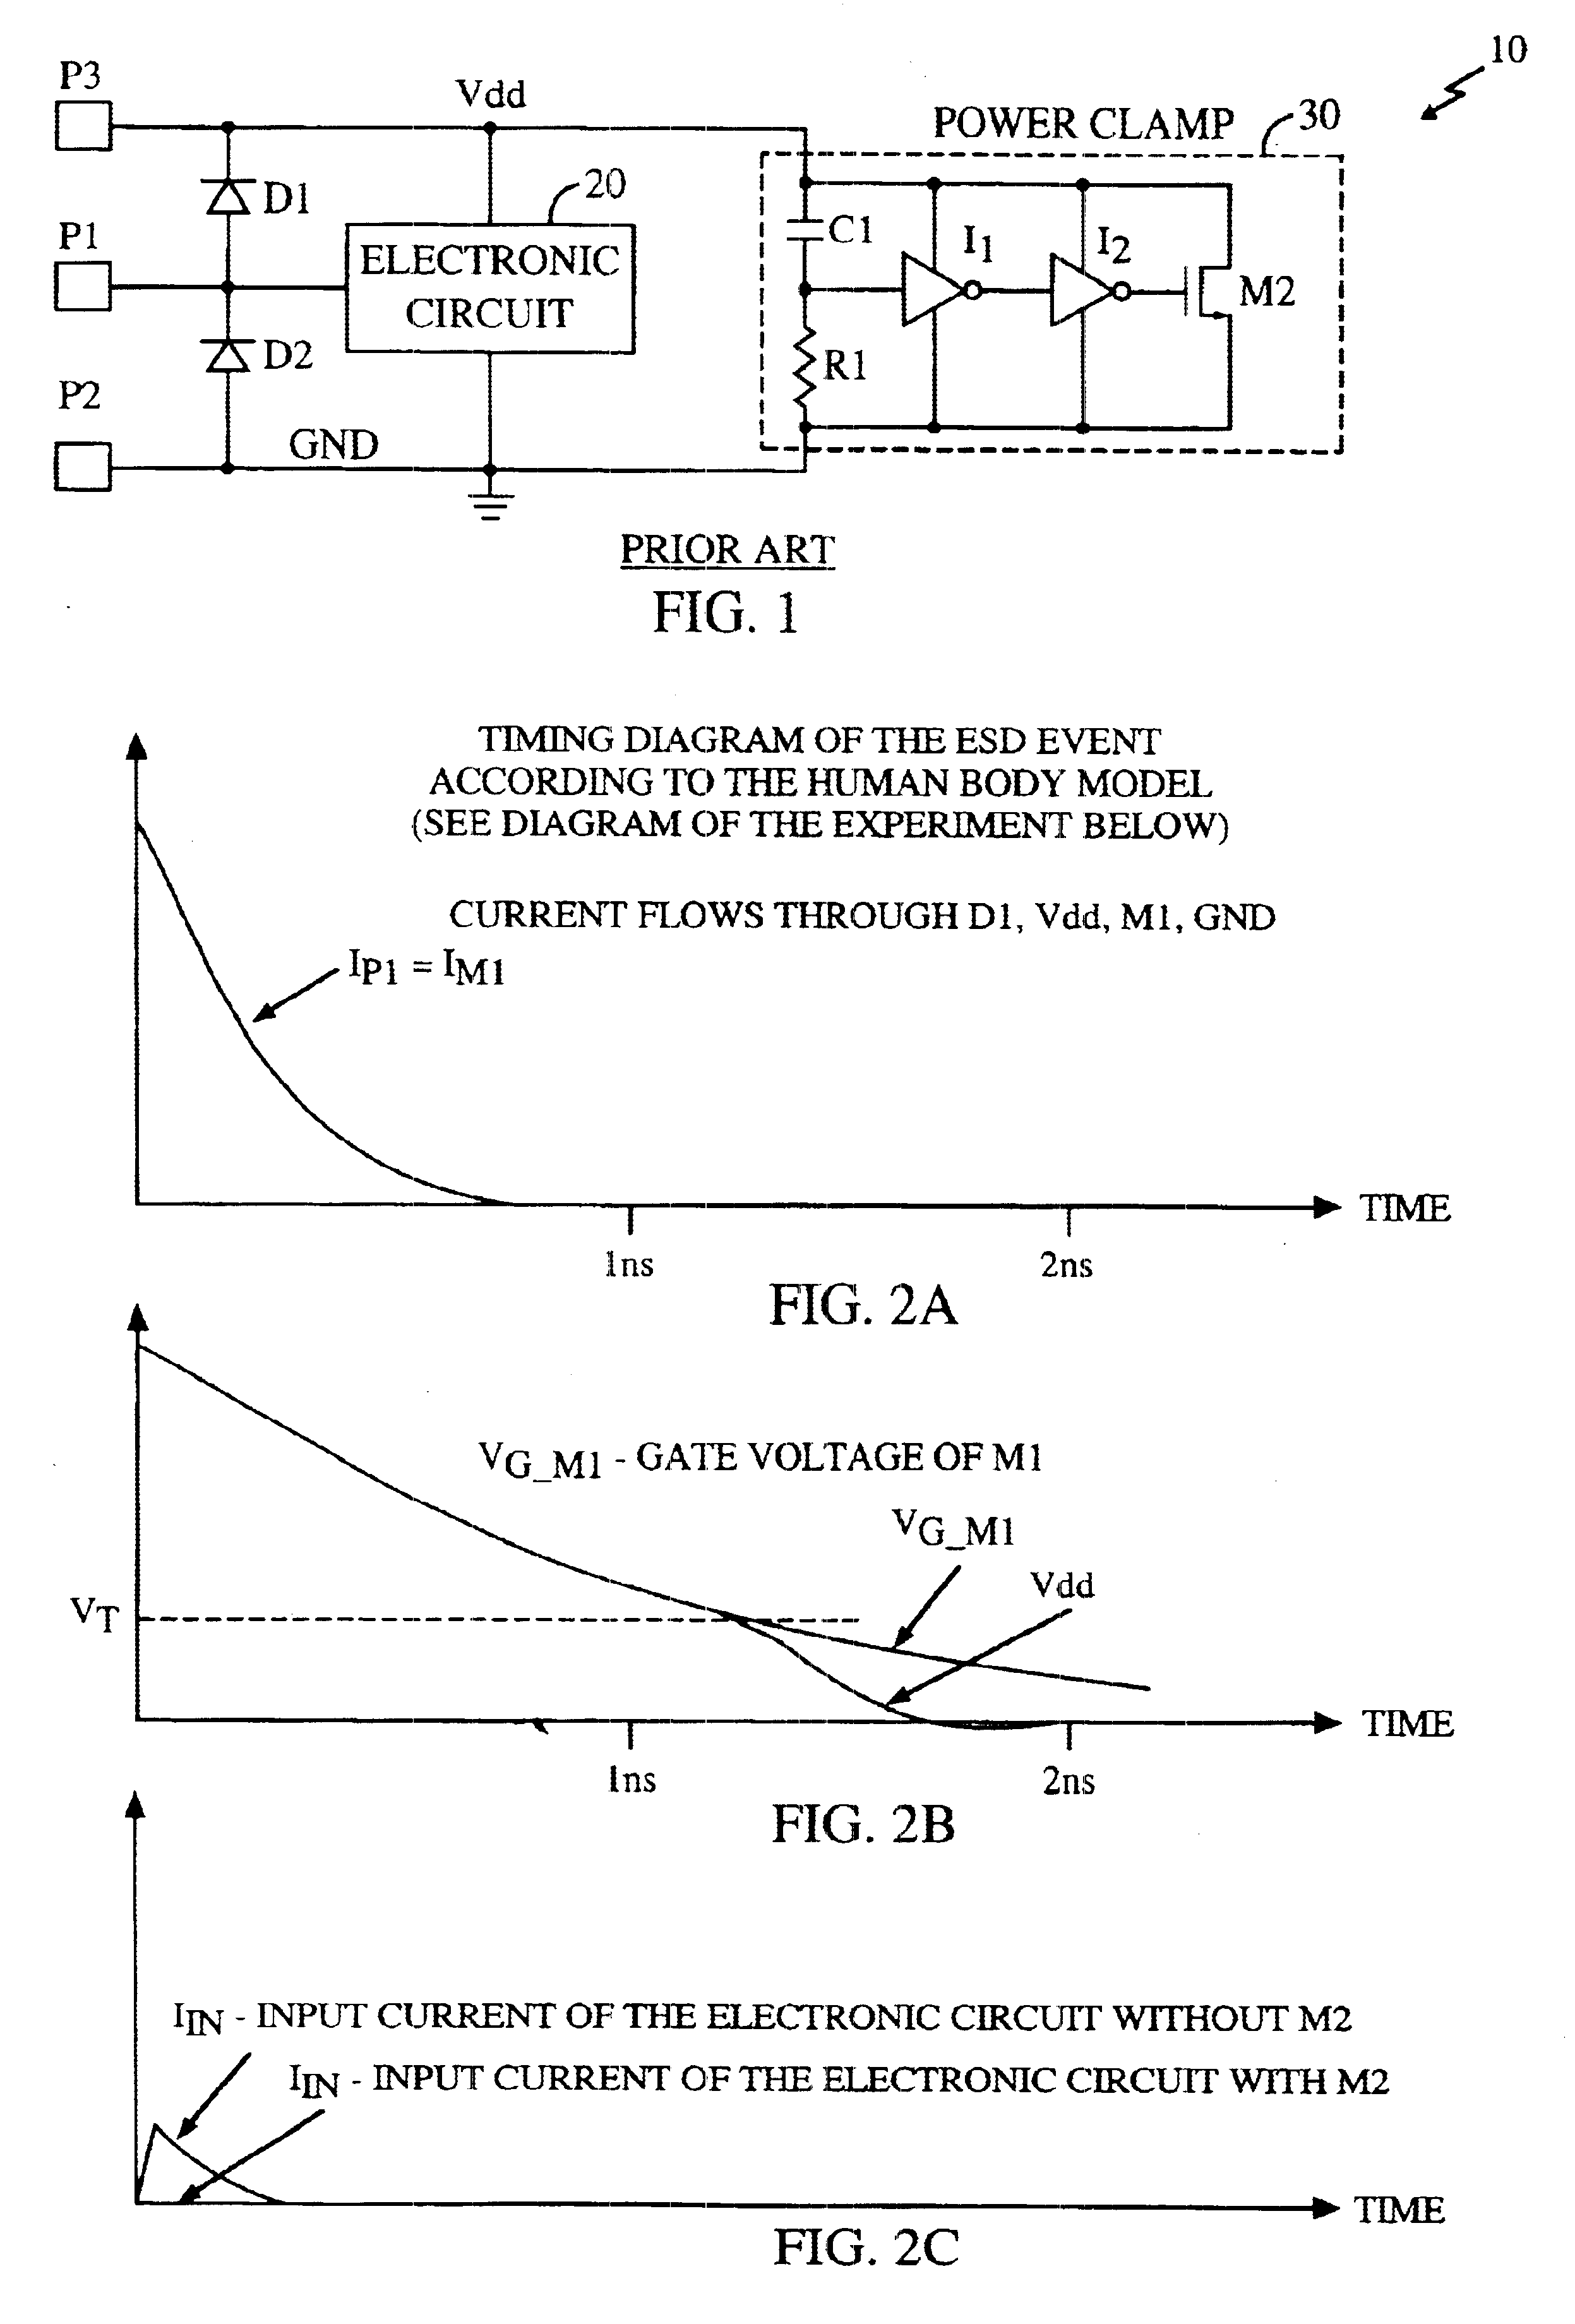 Electro-static discharge protection circuit